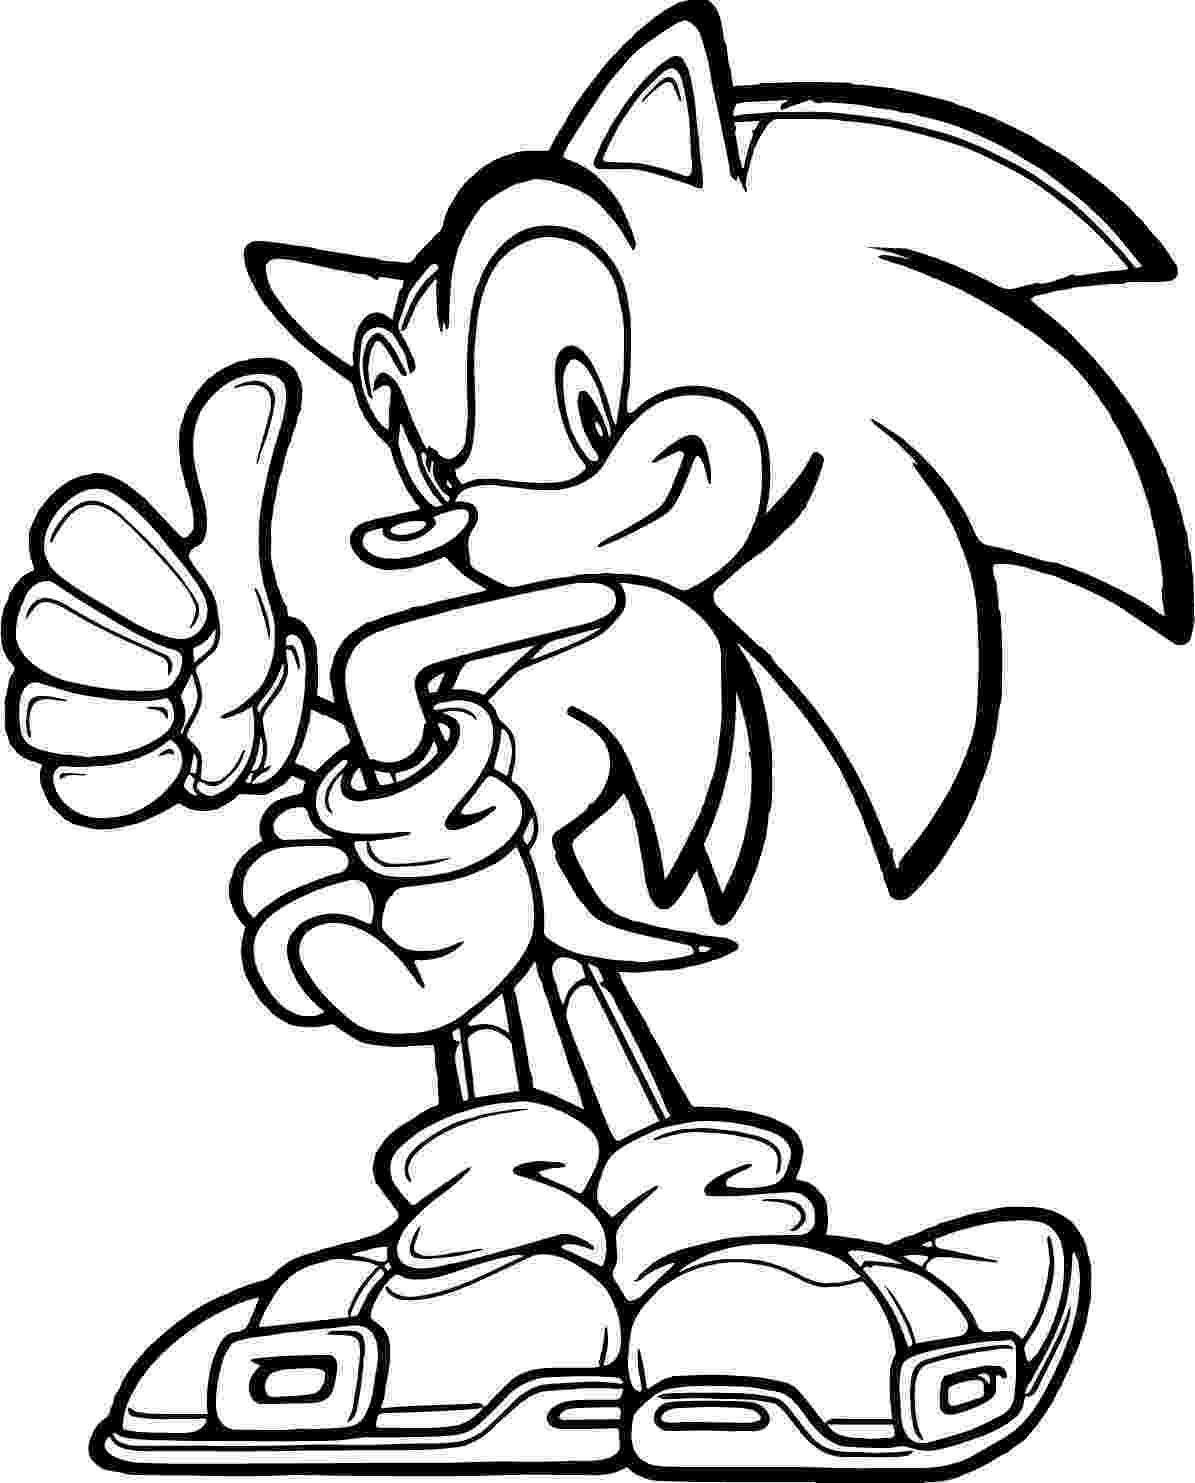 sonic the hedgehog colouring pictures sonic the hedgehog coloring pages colouring the sonic hedgehog pictures 